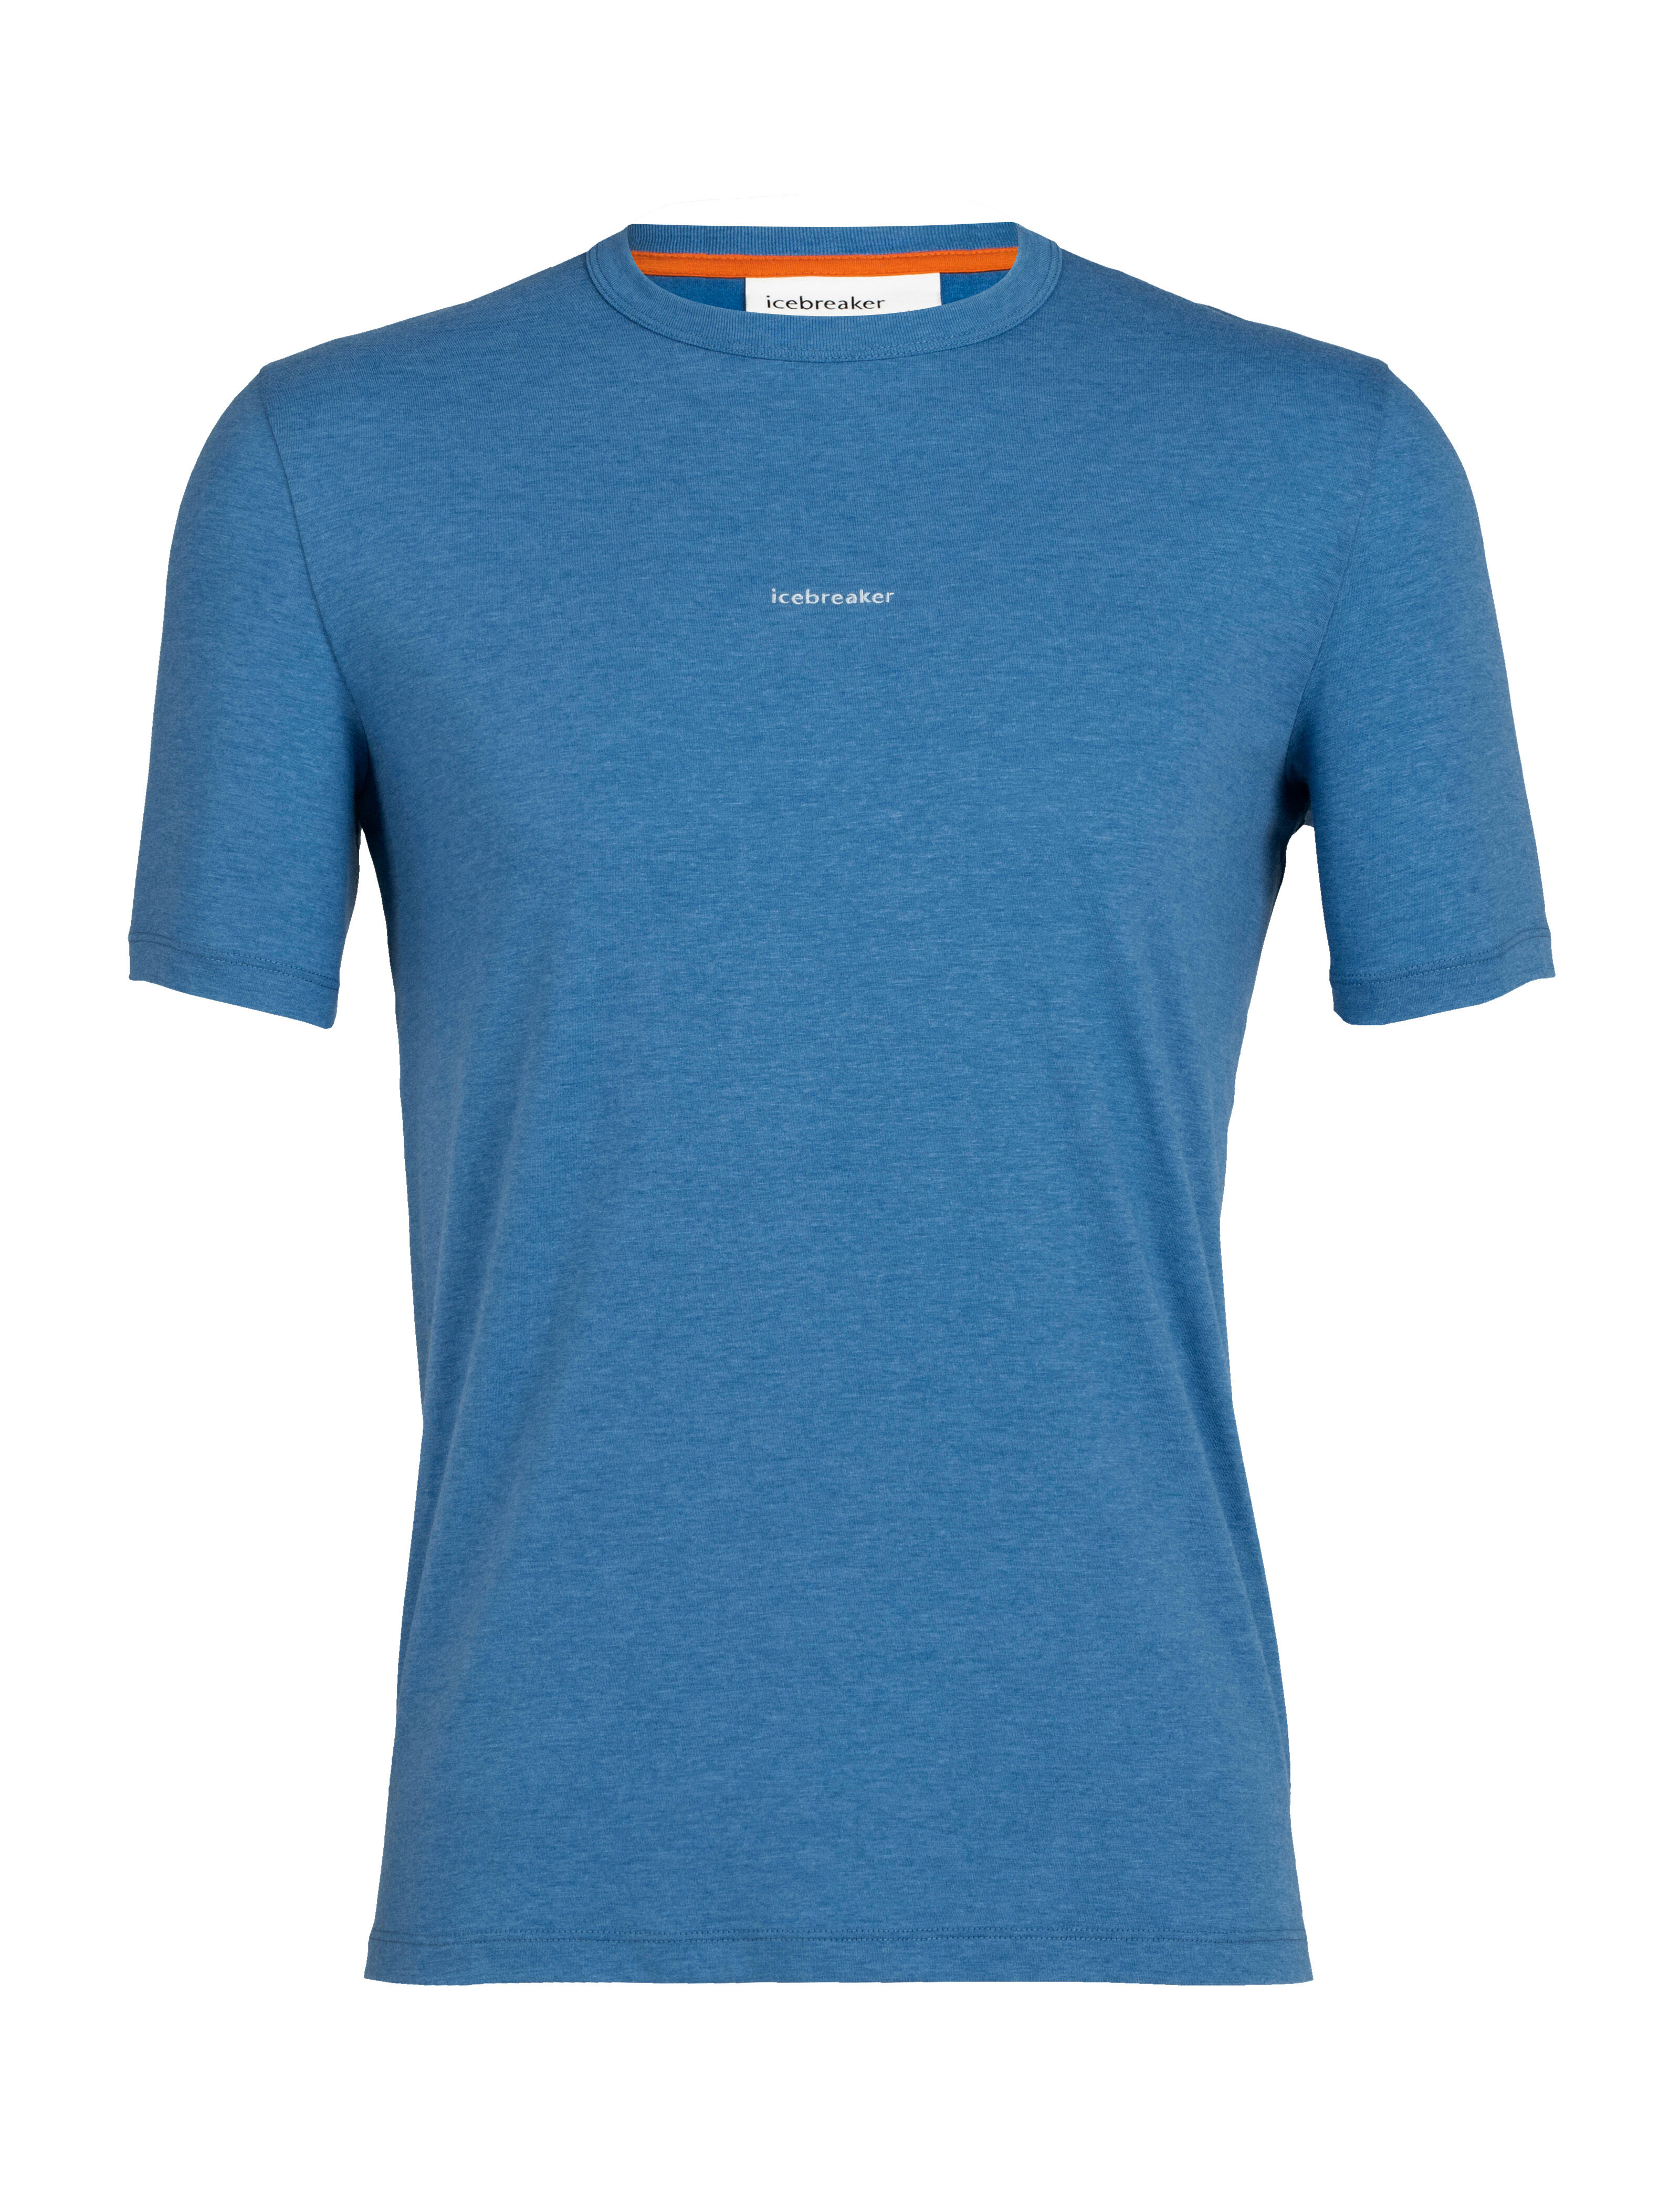 New Montane Men’s Tracle Short Sleeve T-Shirt 